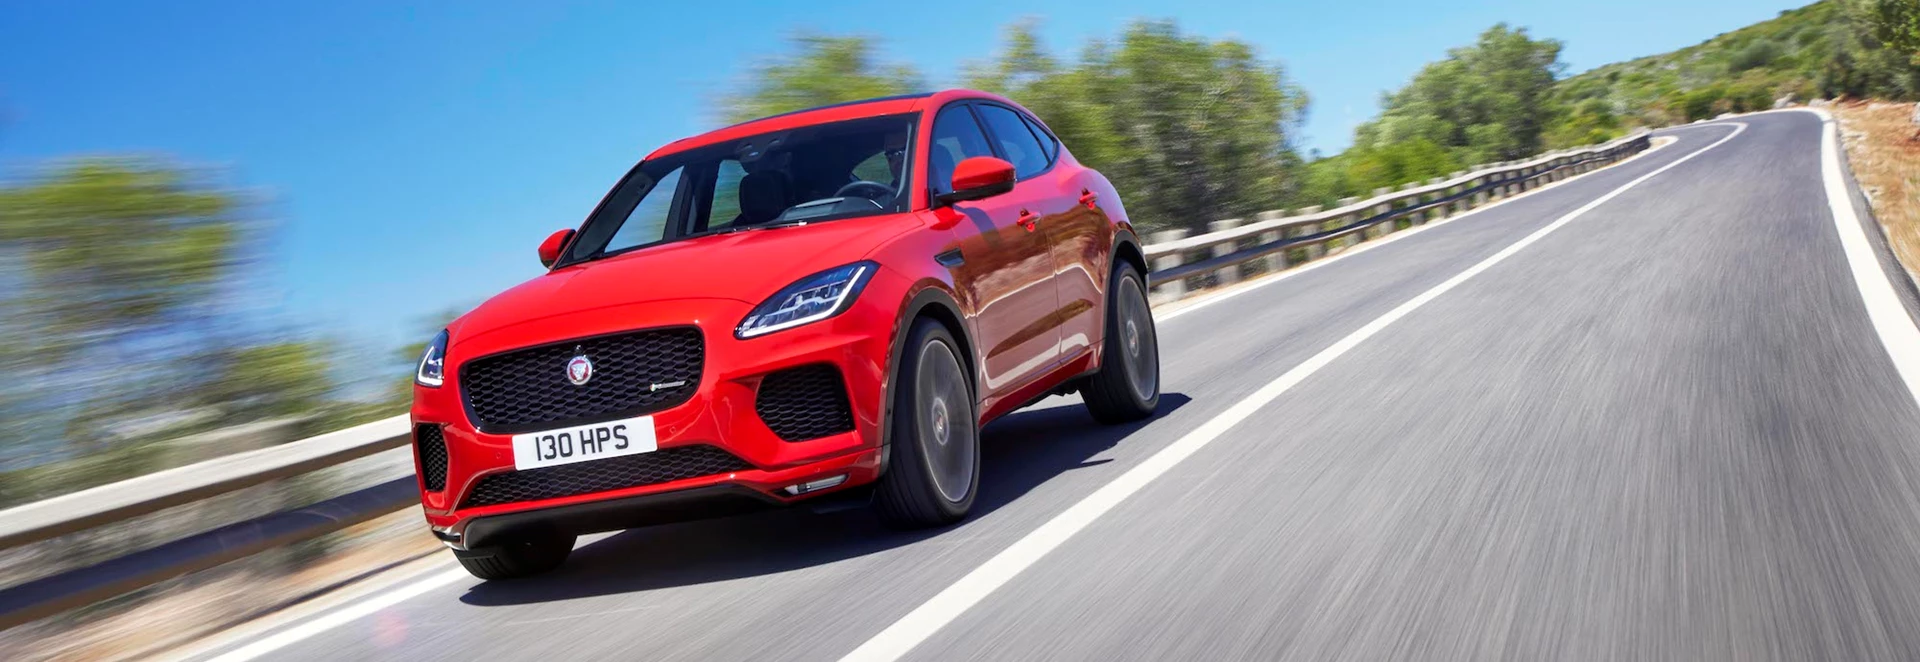 5 Tech features to look out for on the Jaguar E-Pace SUV